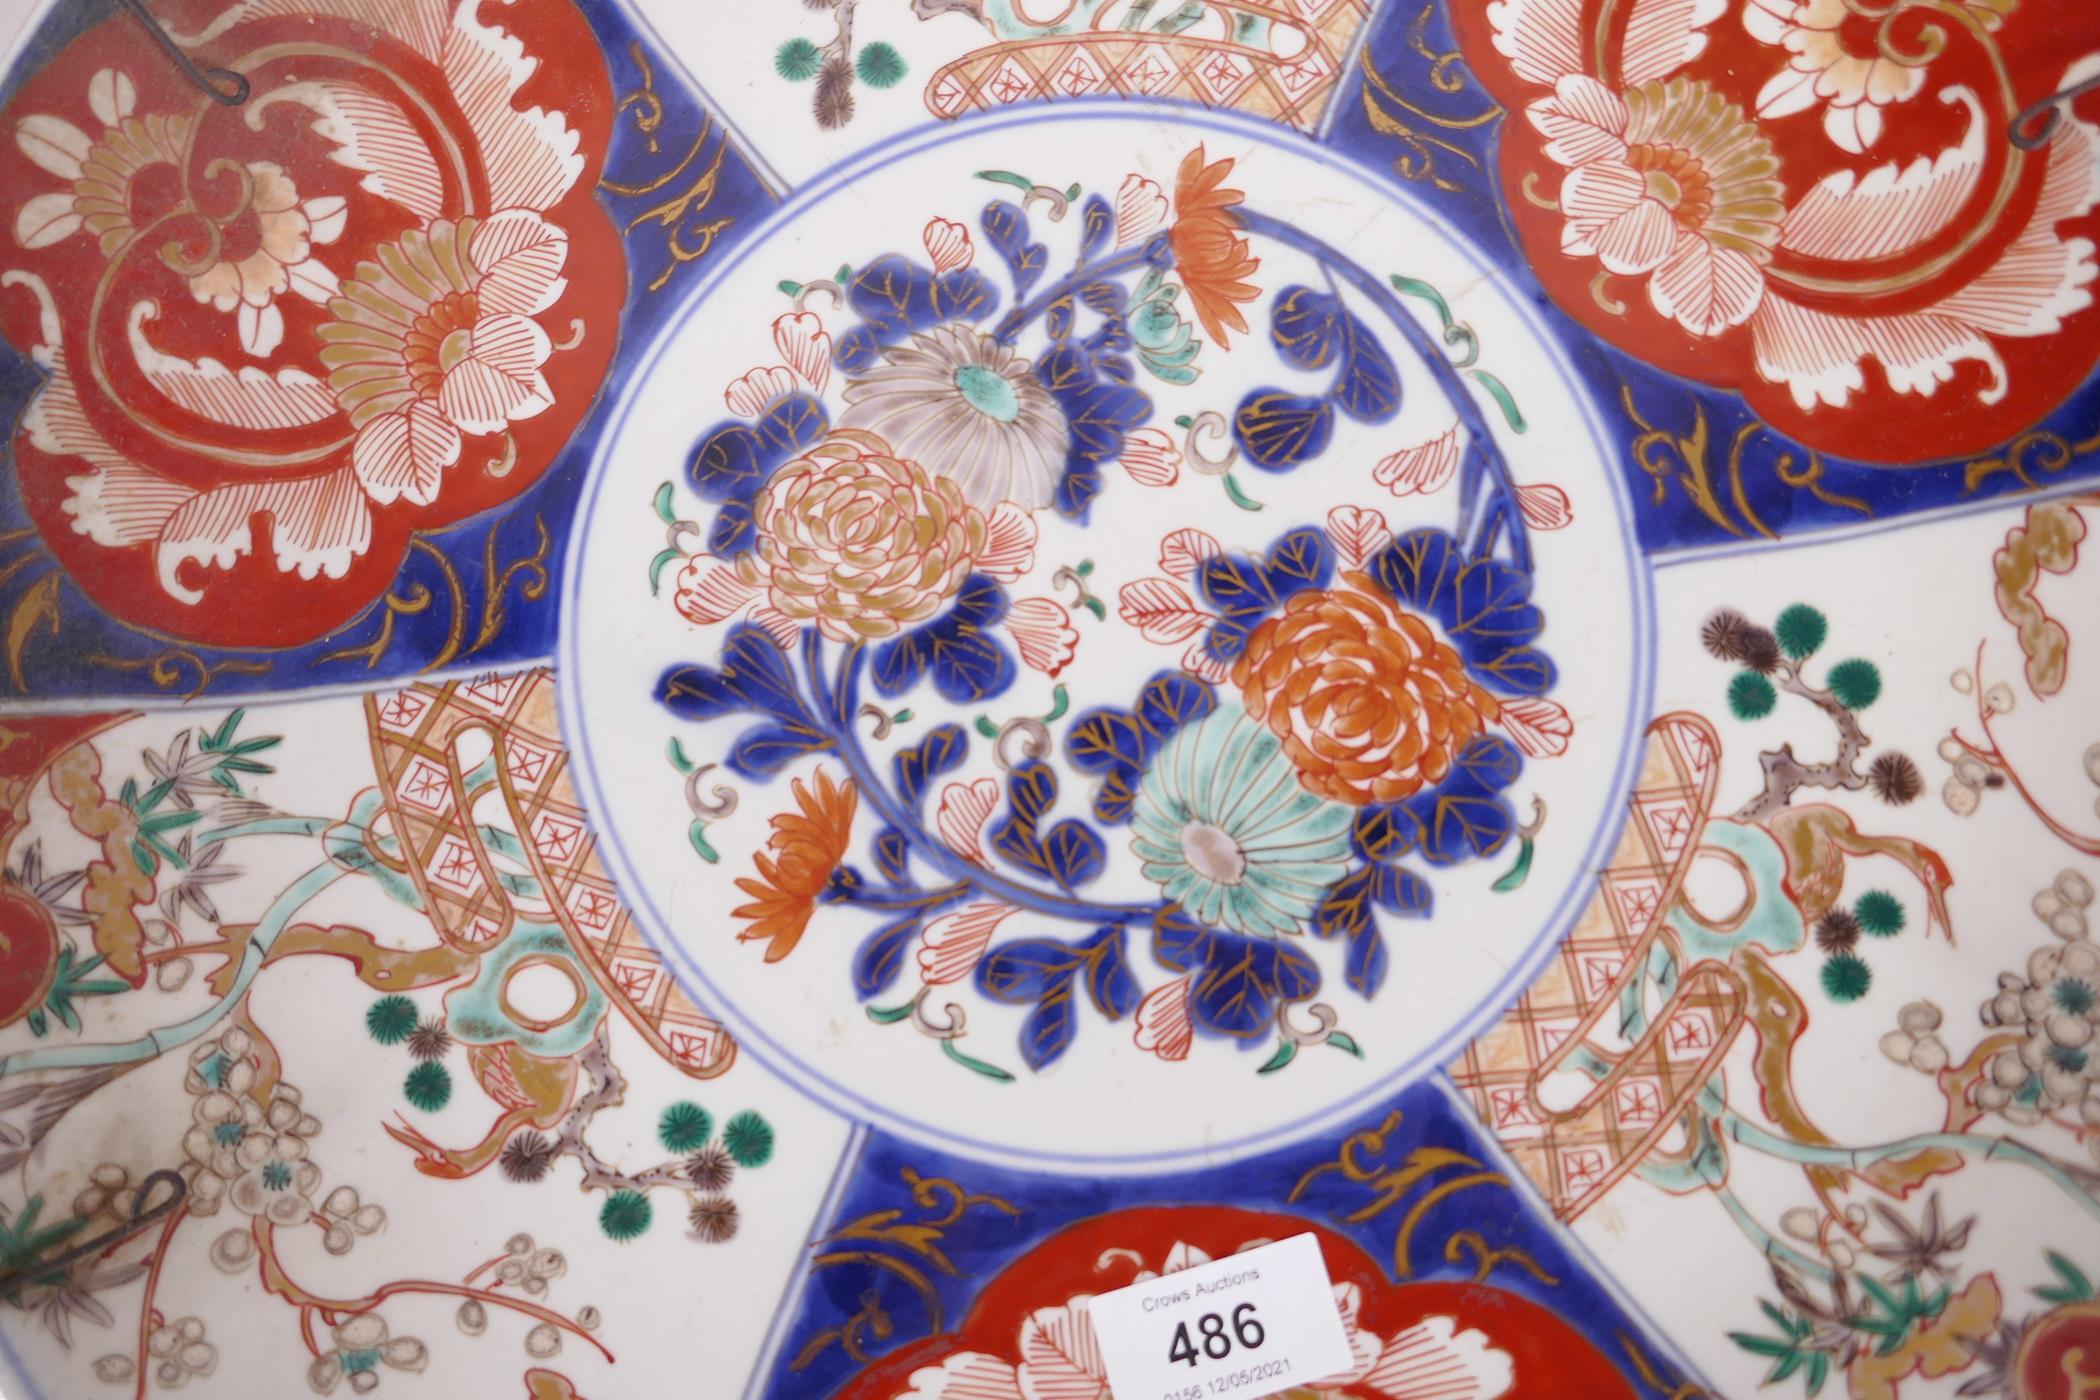 A Meiji Imari charger with typical decoration, 15½" diameter - Image 2 of 6